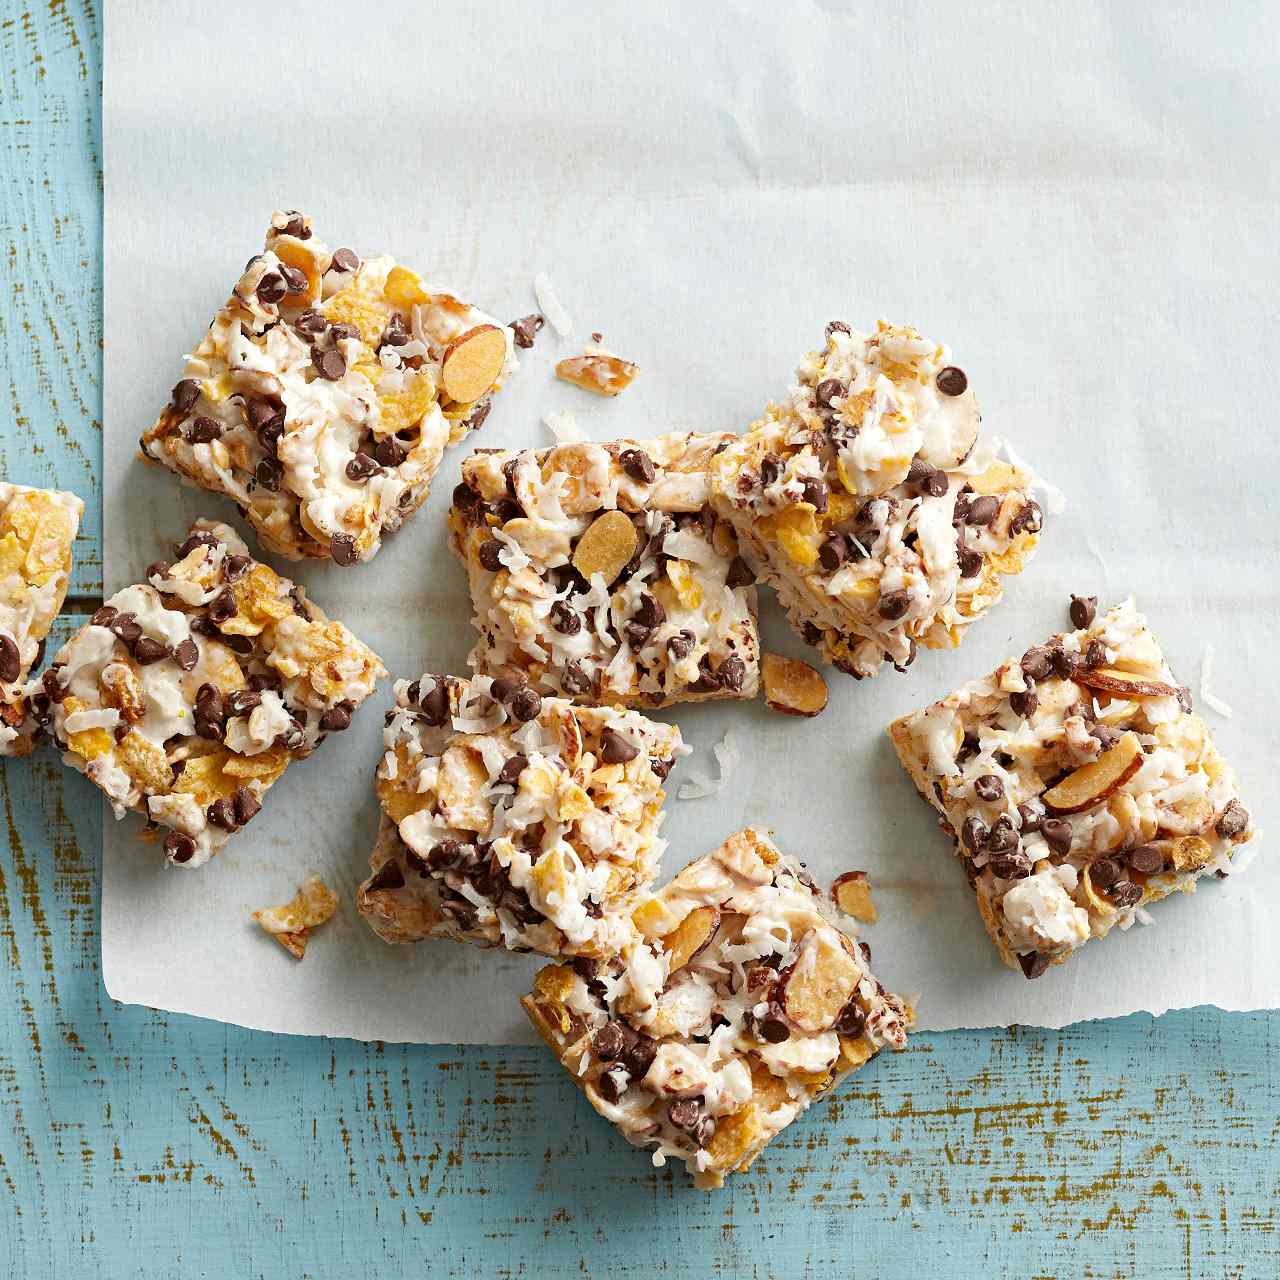 Chocolate, Coconut, and Almond Bars